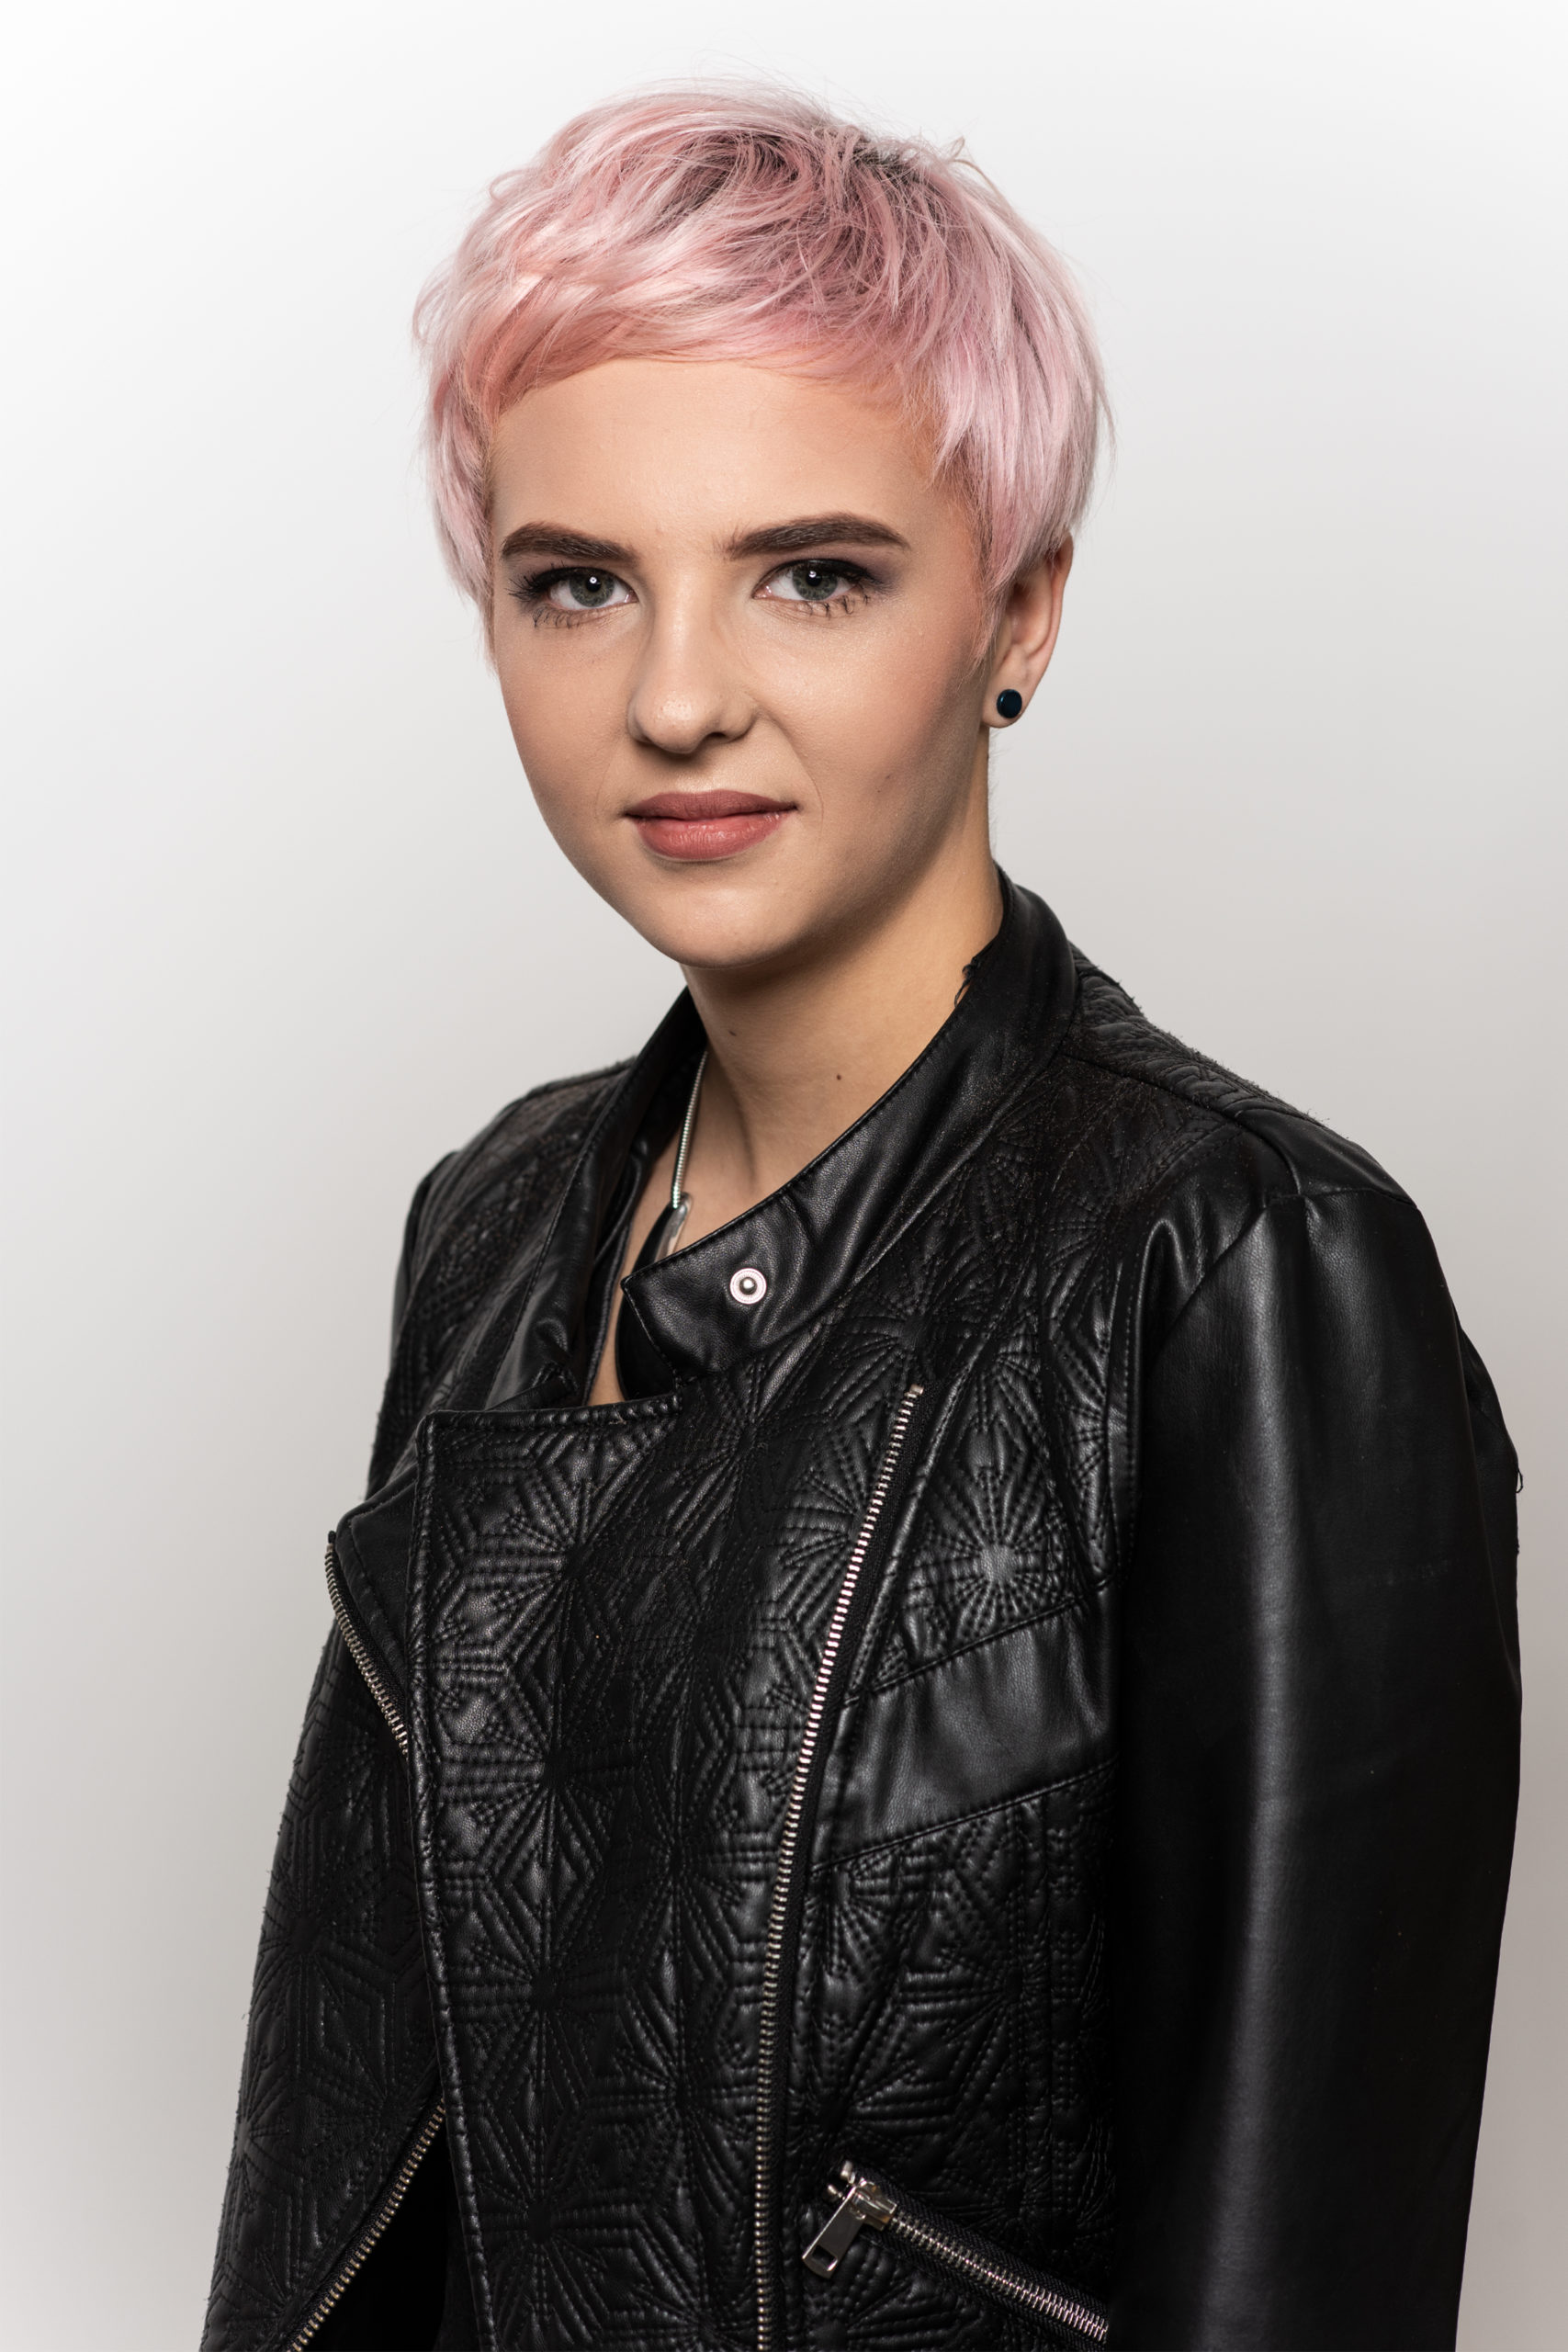 Soft Pixiecut – Short Hair, Easy to Style